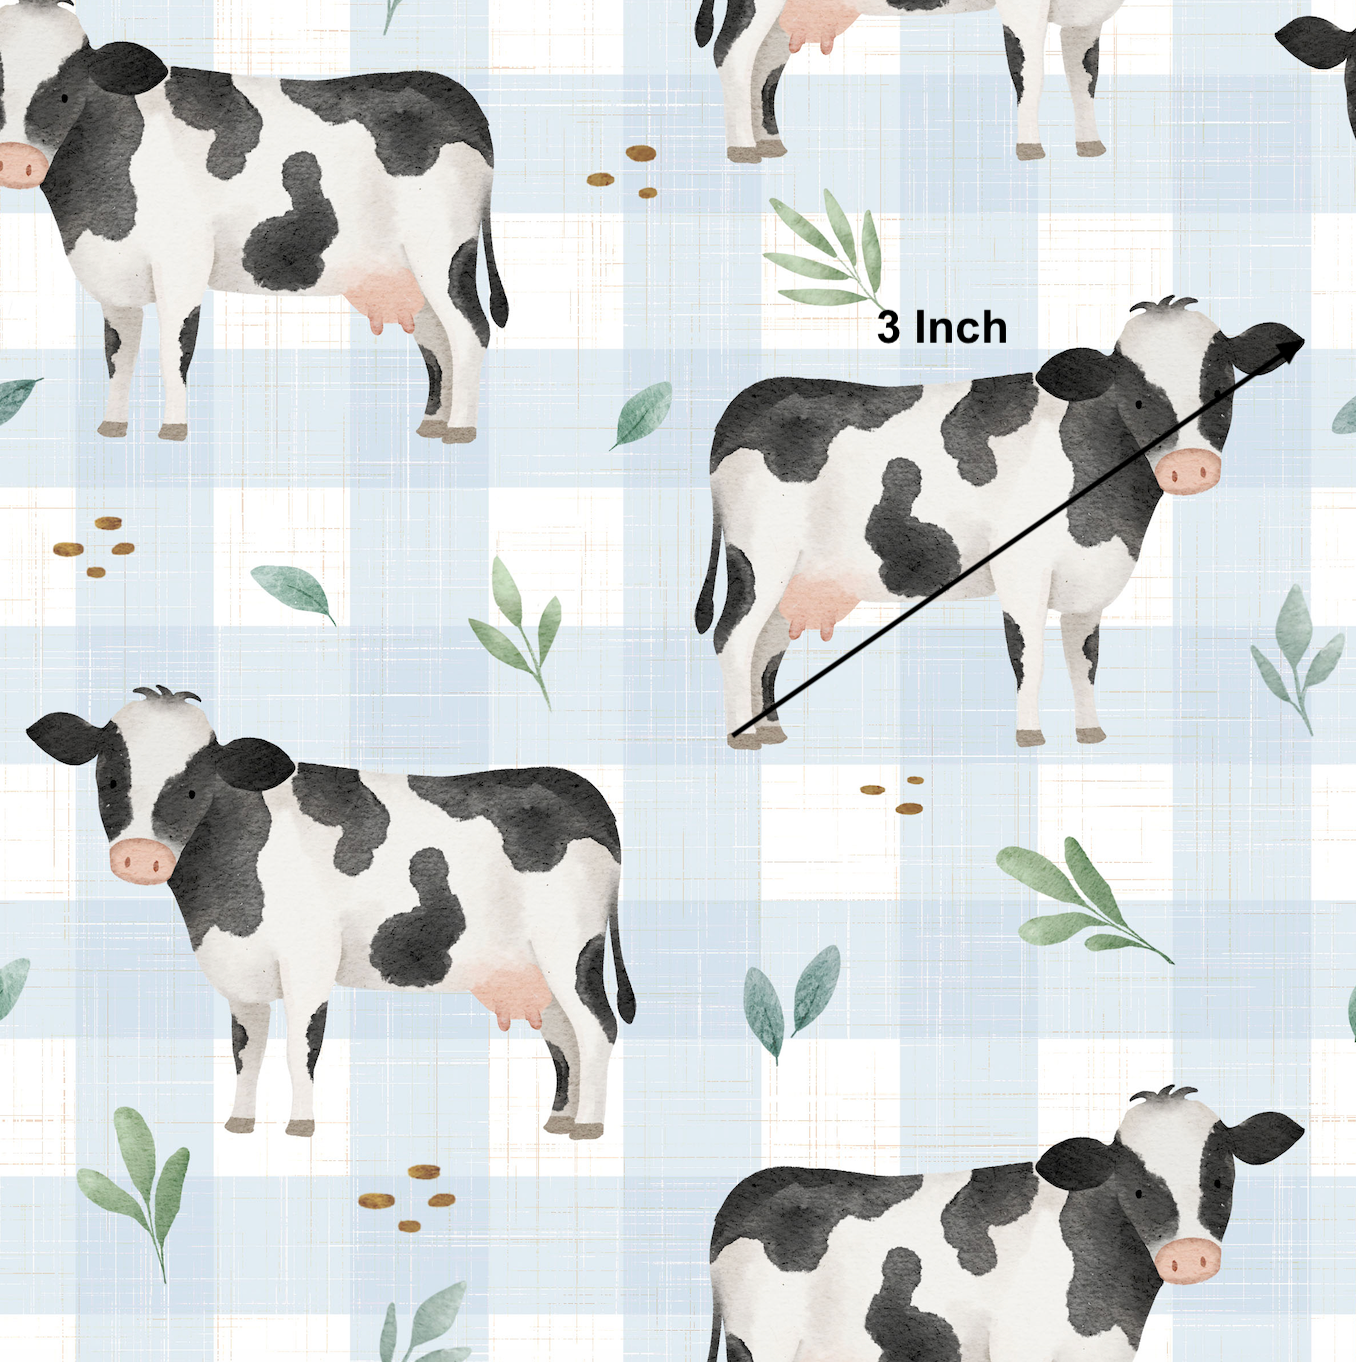 Cows on Gingham - Woven Fabric